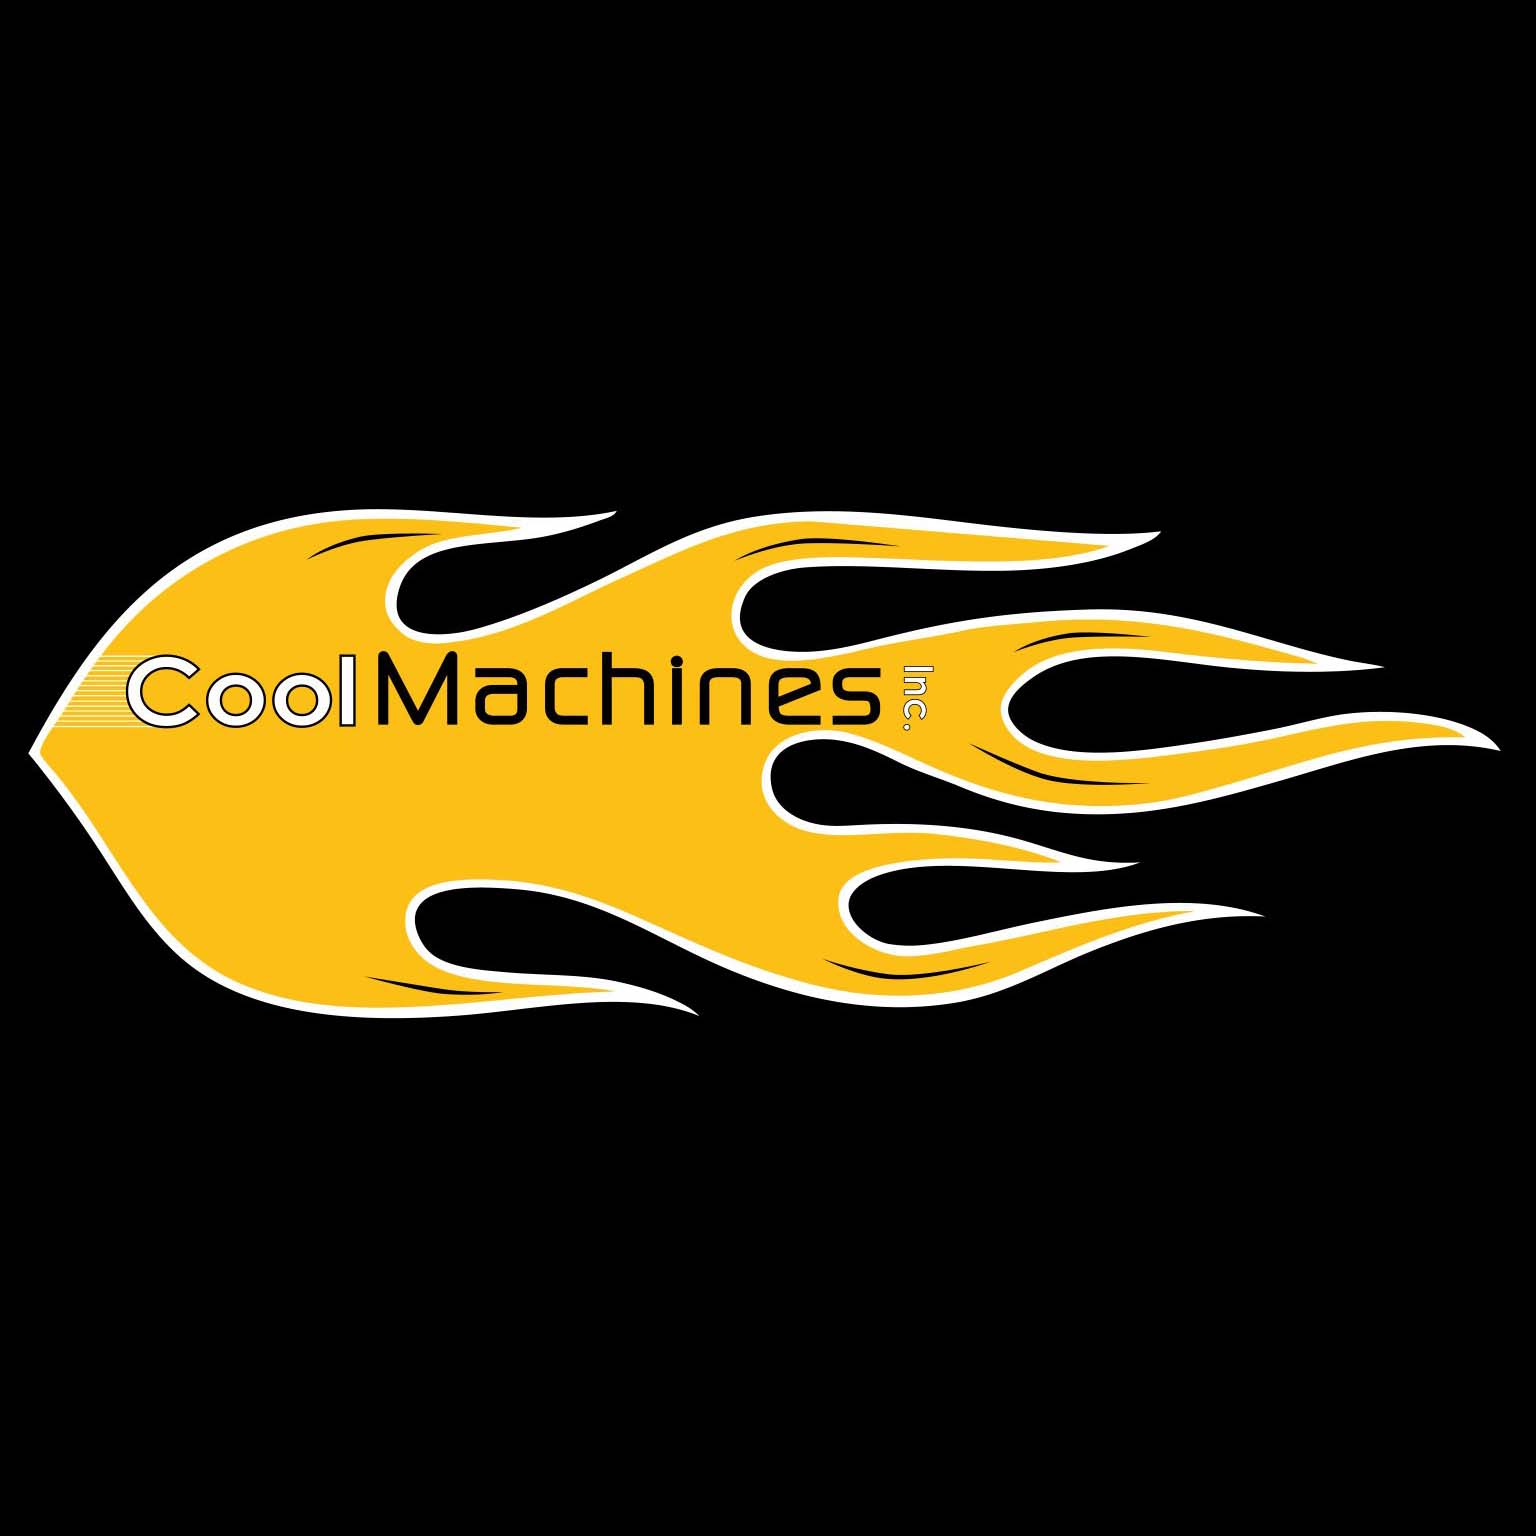 CoolMachines logo with yellow flames and black and white font